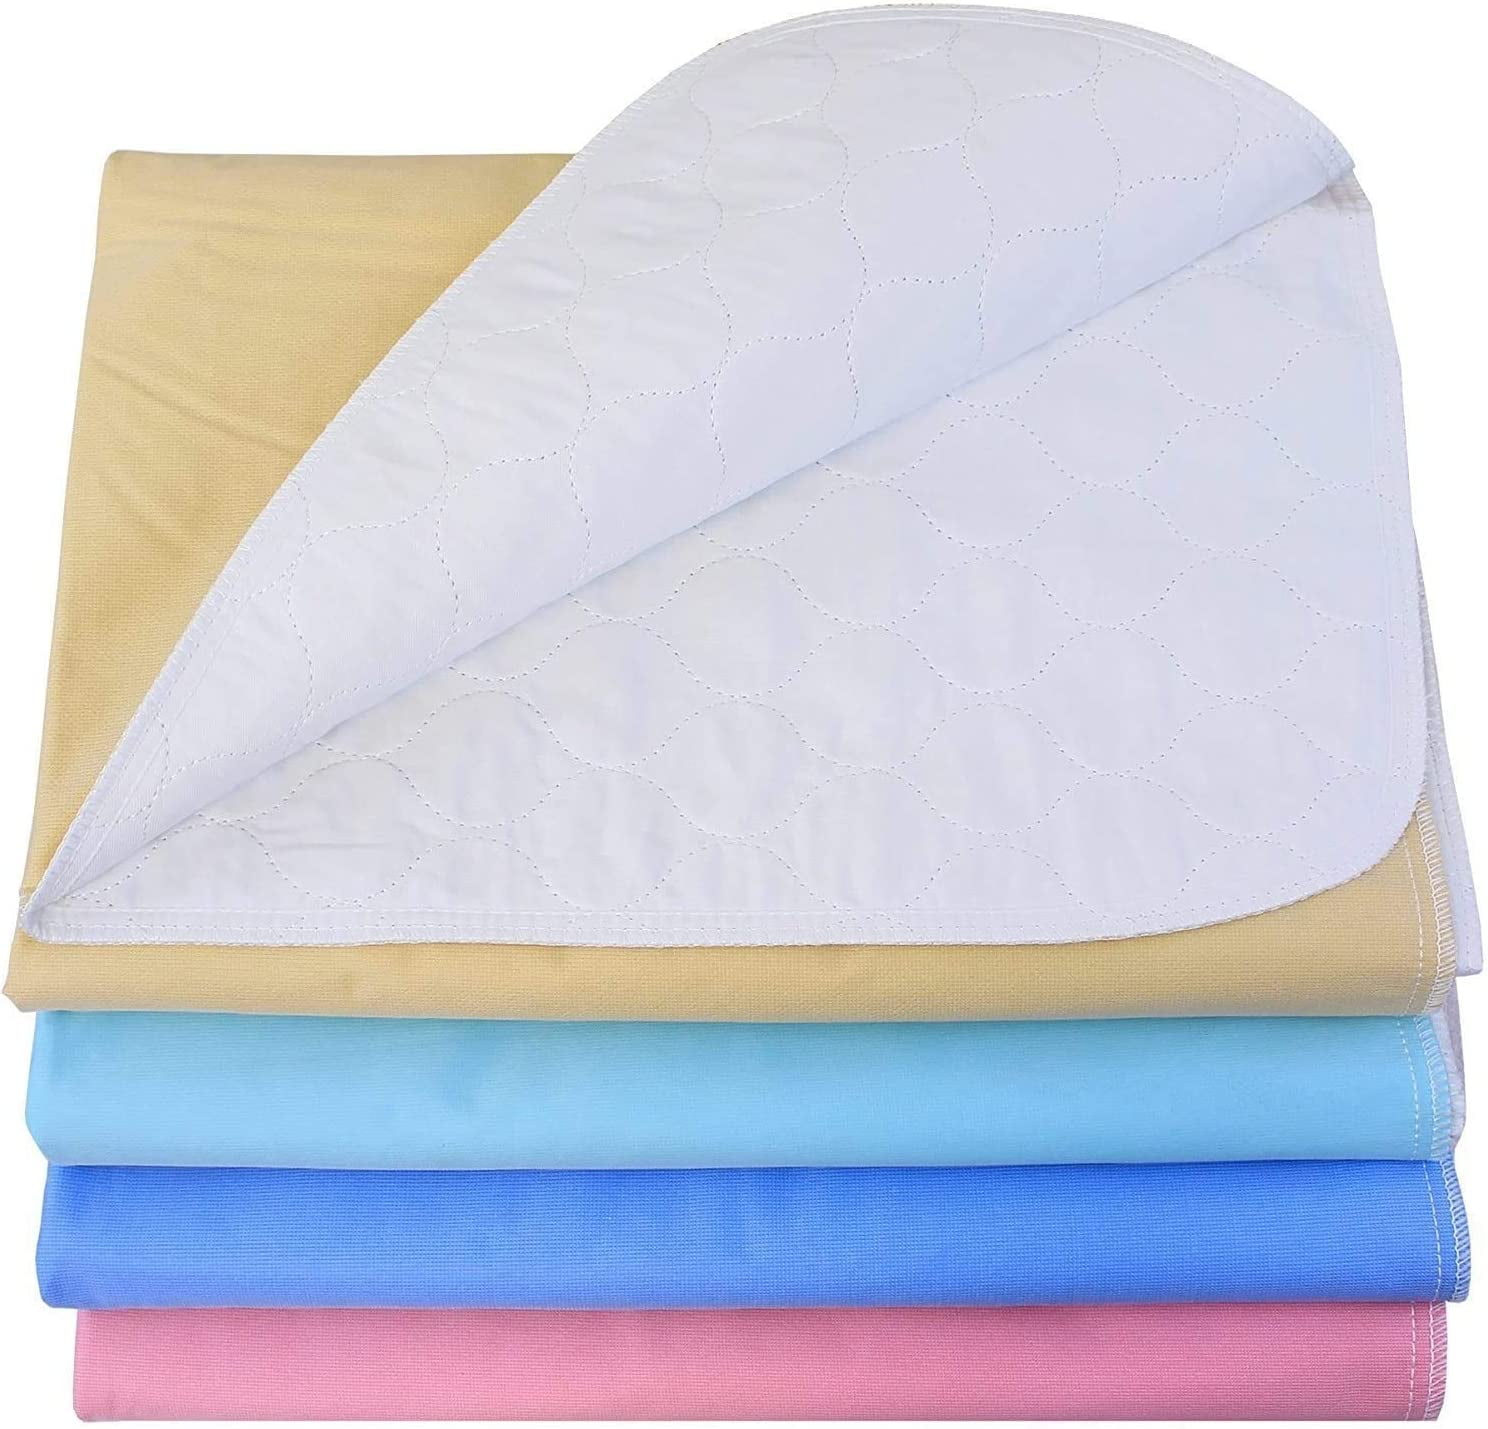 Conkote Heavy Absorbency Bed Pads, 34X36 (4 Pack), Washable and Reusable  Incontinence Underpads, Waterproof Sheet and Mattress Protectors